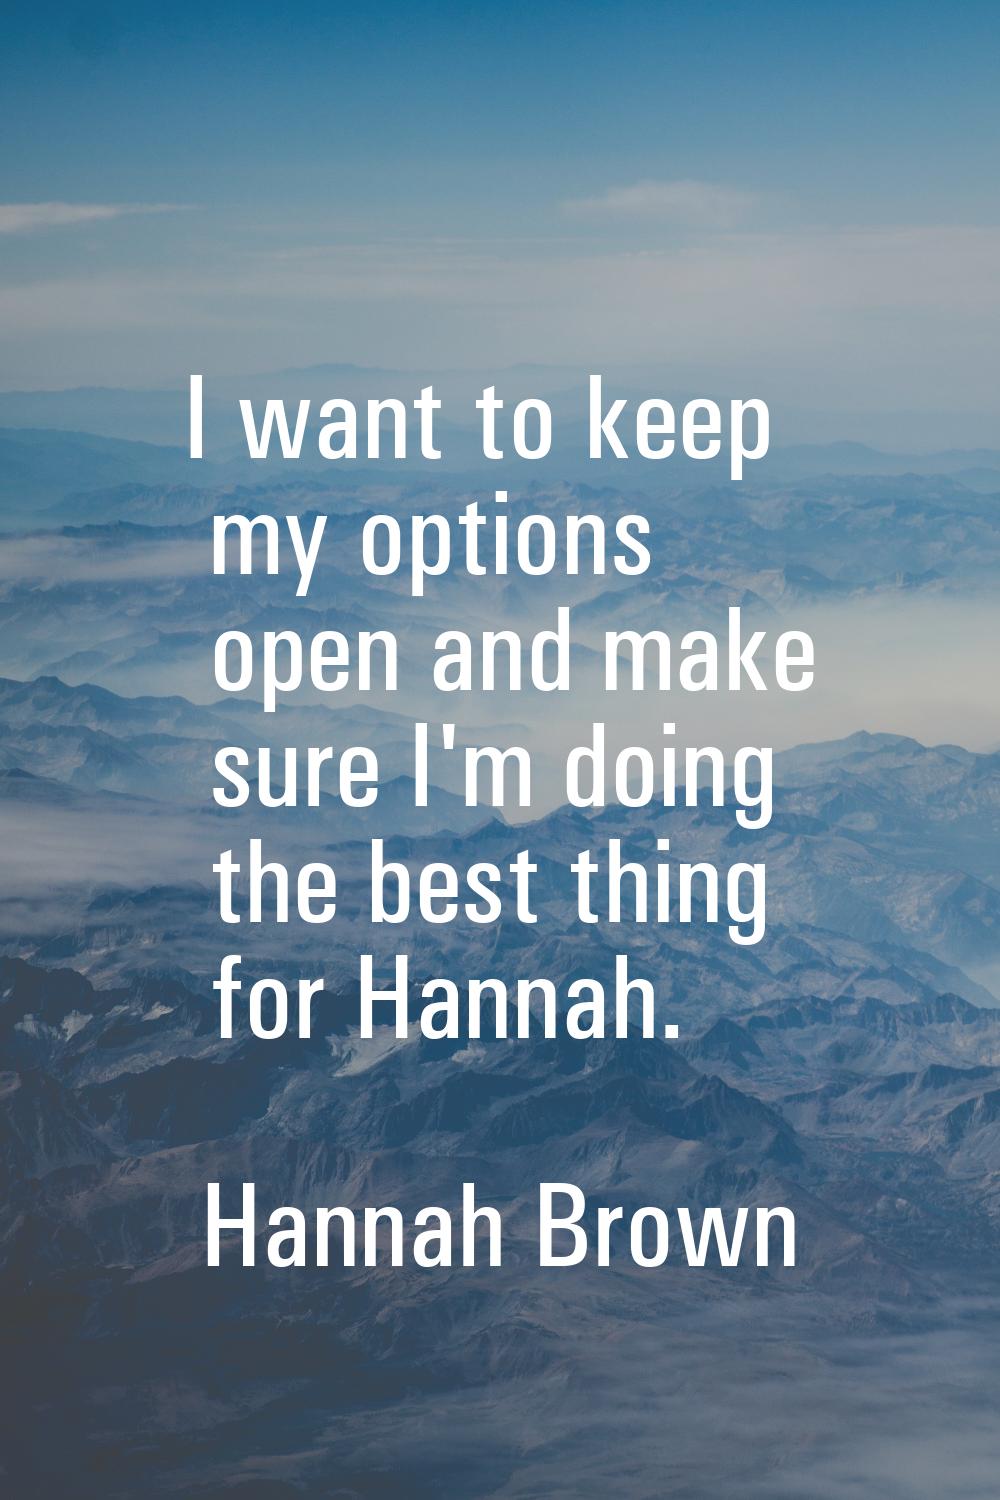 I want to keep my options open and make sure I'm doing the best thing for Hannah.